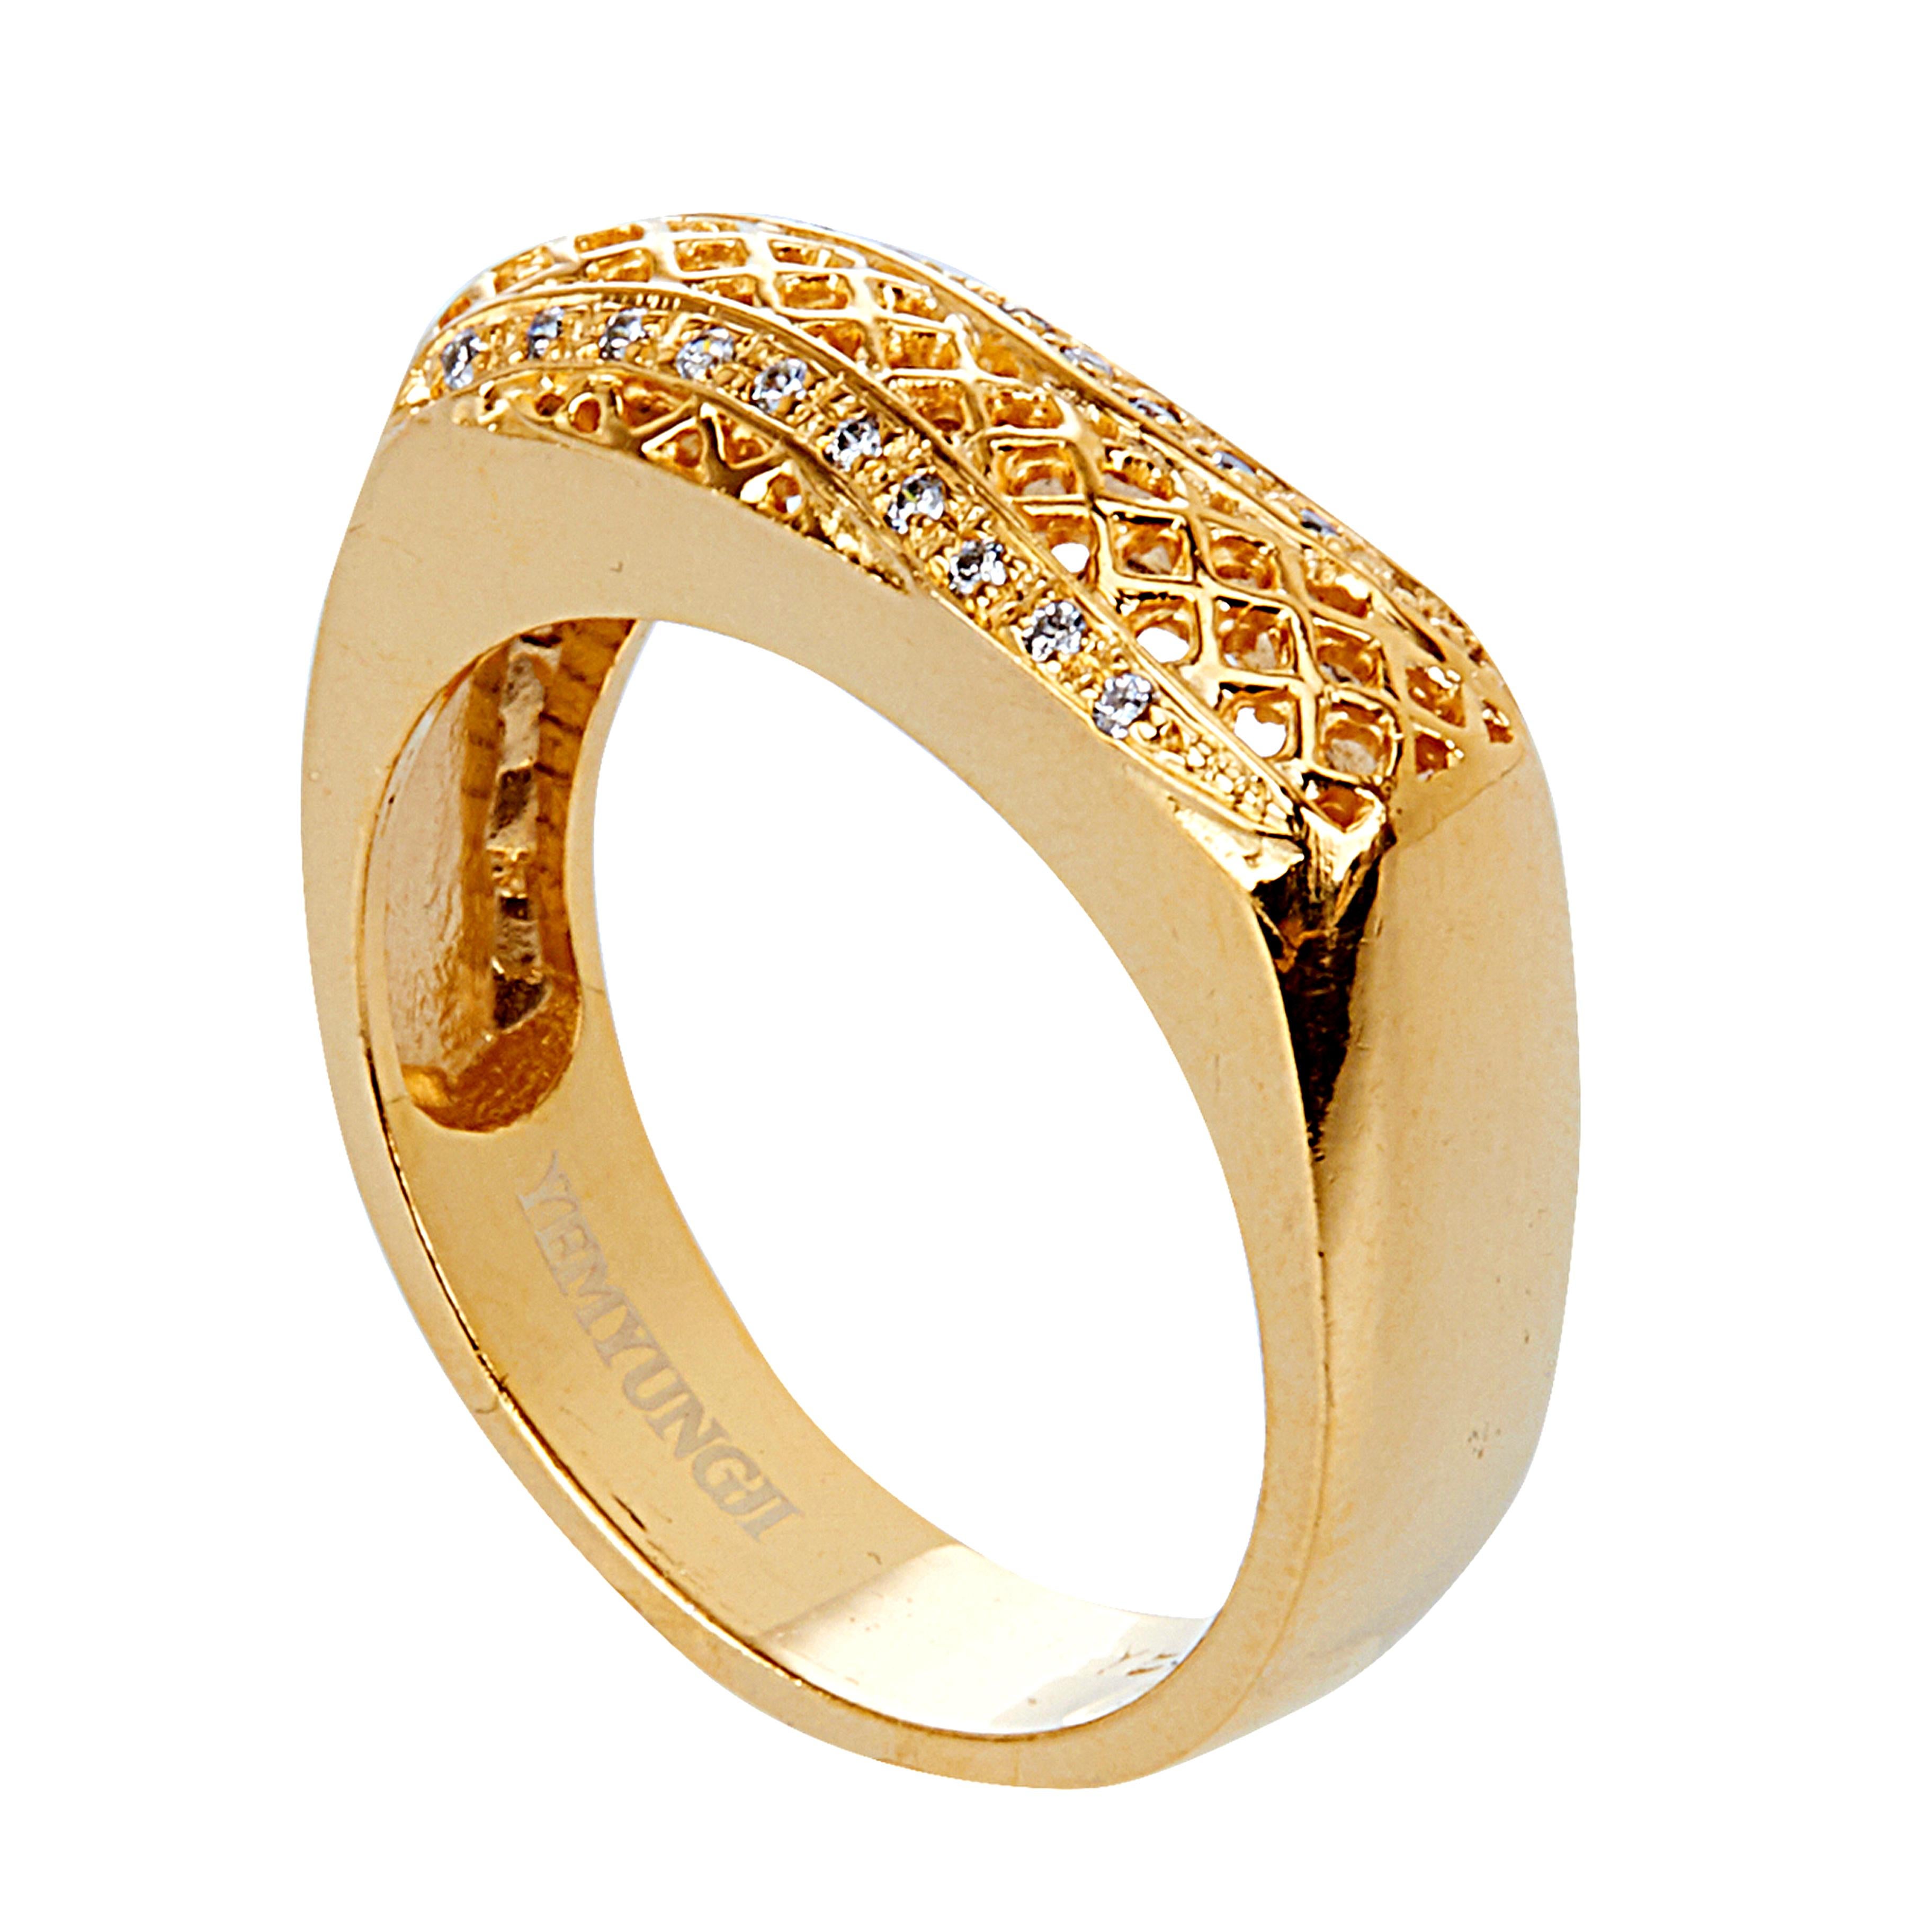 Numerous diamonds and yellow and white gold colors make a perfect combination to create a variety of looks depending on the wearer's layering. Glowing diamonds are set with her meshwork, adding dignity and delicacy to this unique jewelry.
Wear it